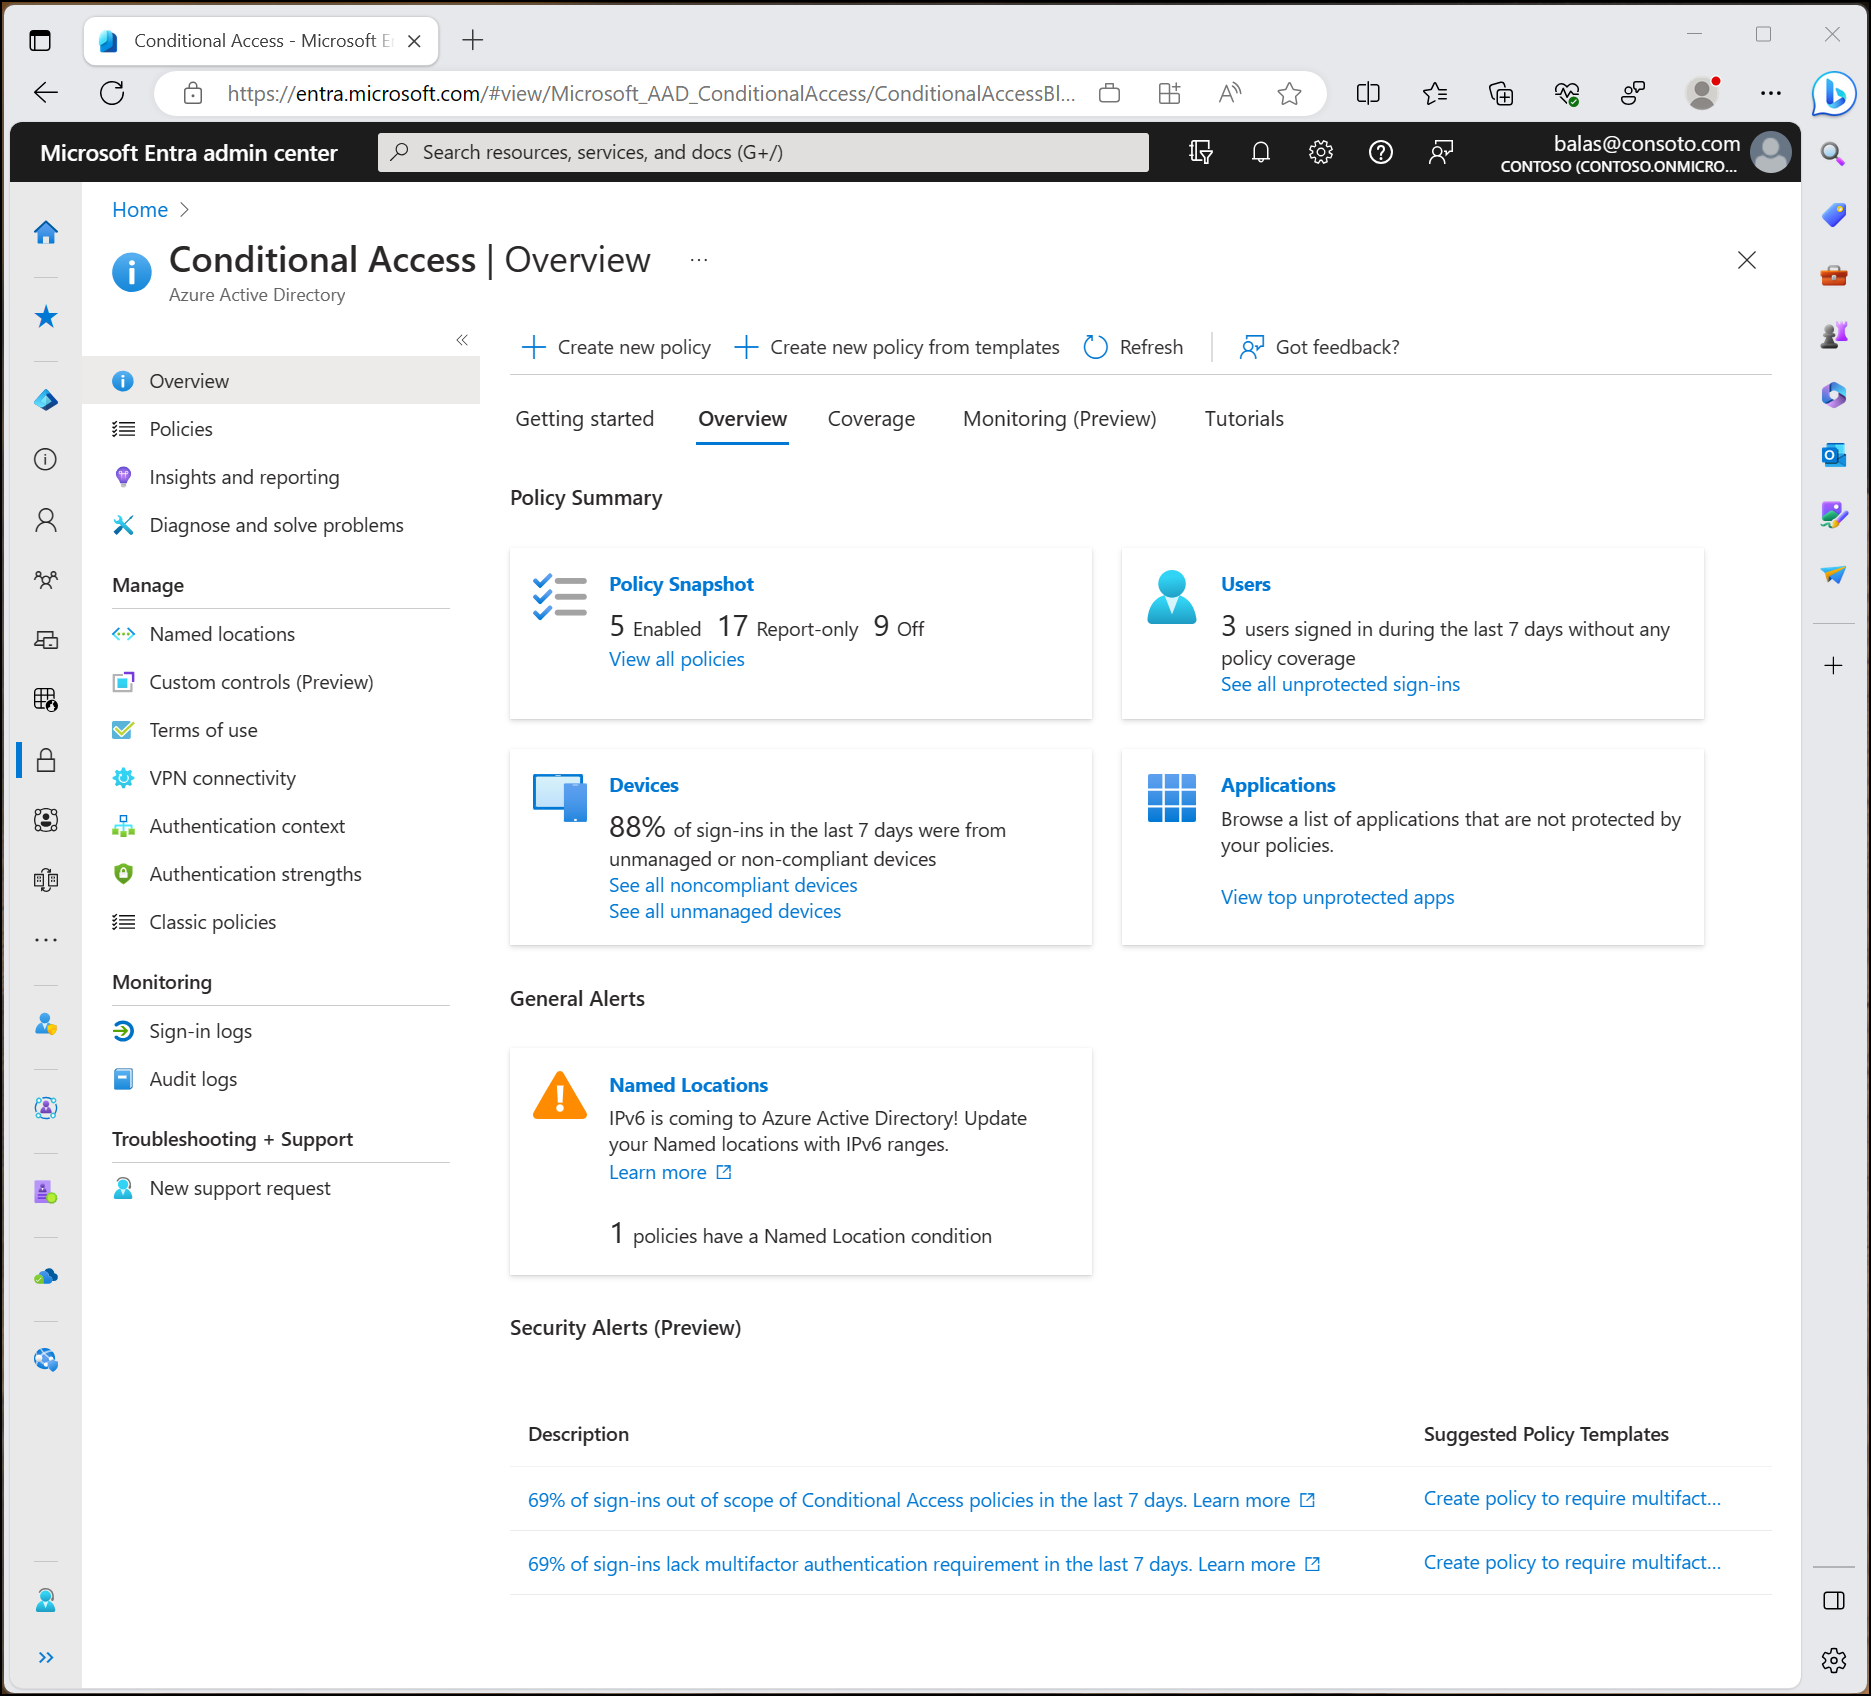 Screenshot of the Conditional Access overview page.